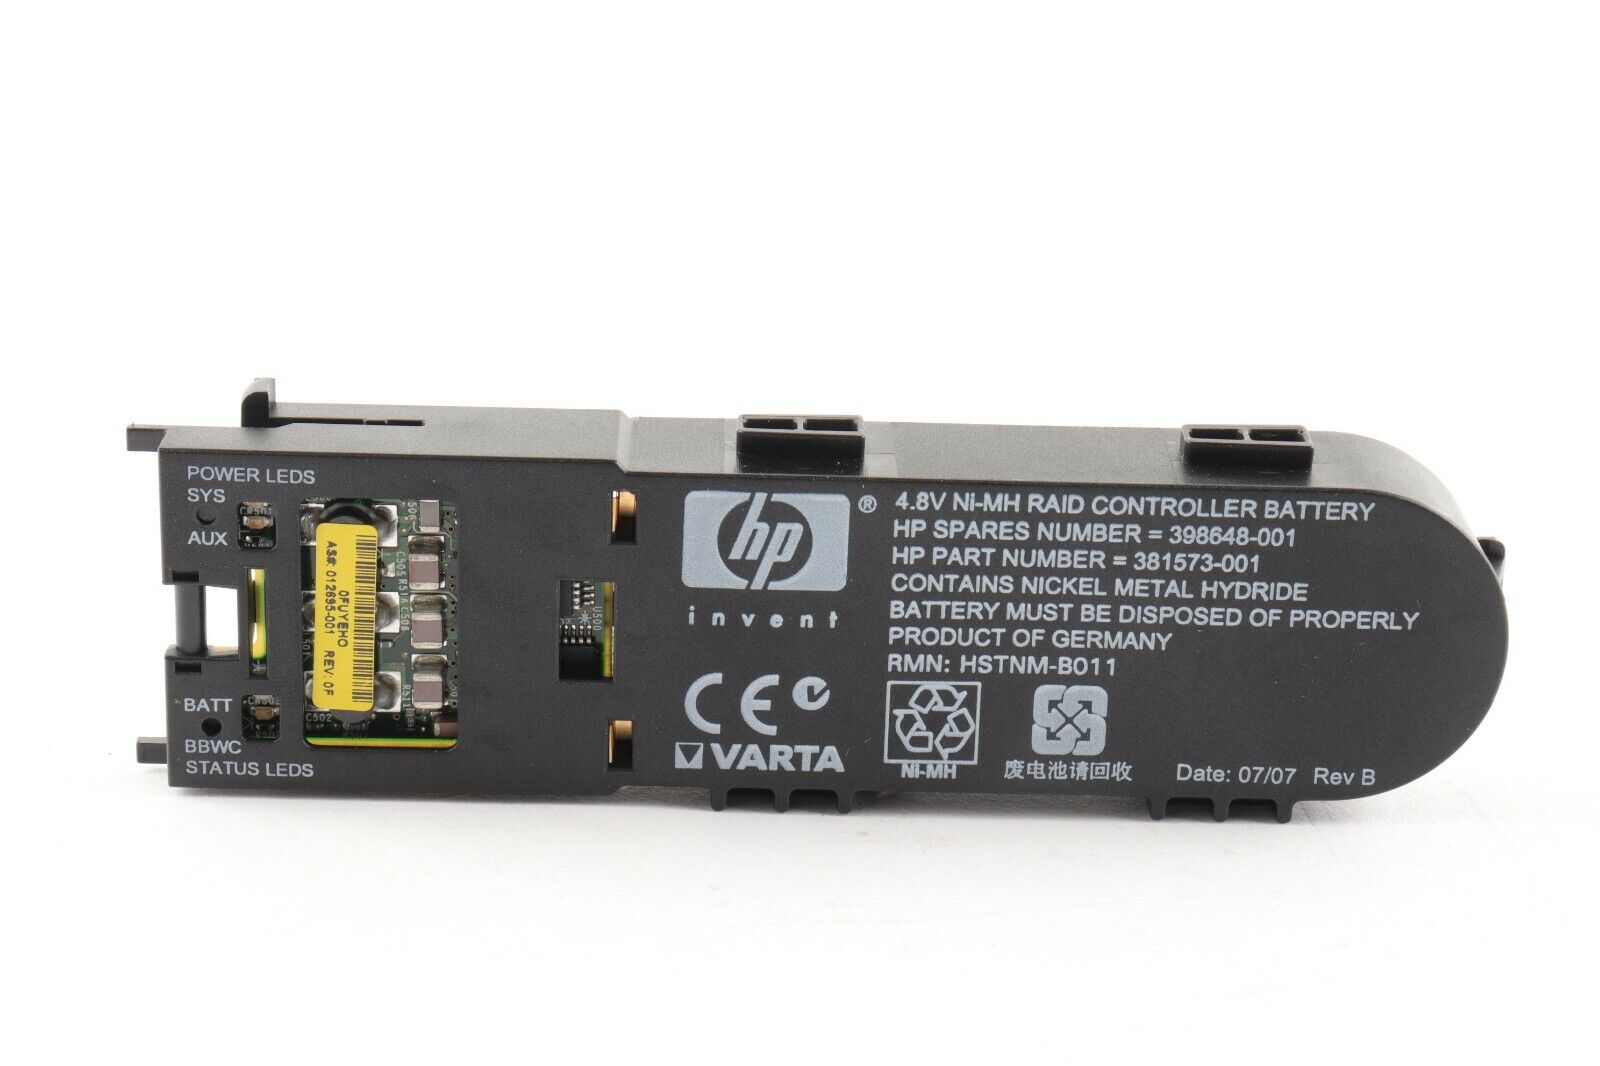 HP 381573-001 - 4.8V Ni-MH Raid Controller Battery Pack For HP P400